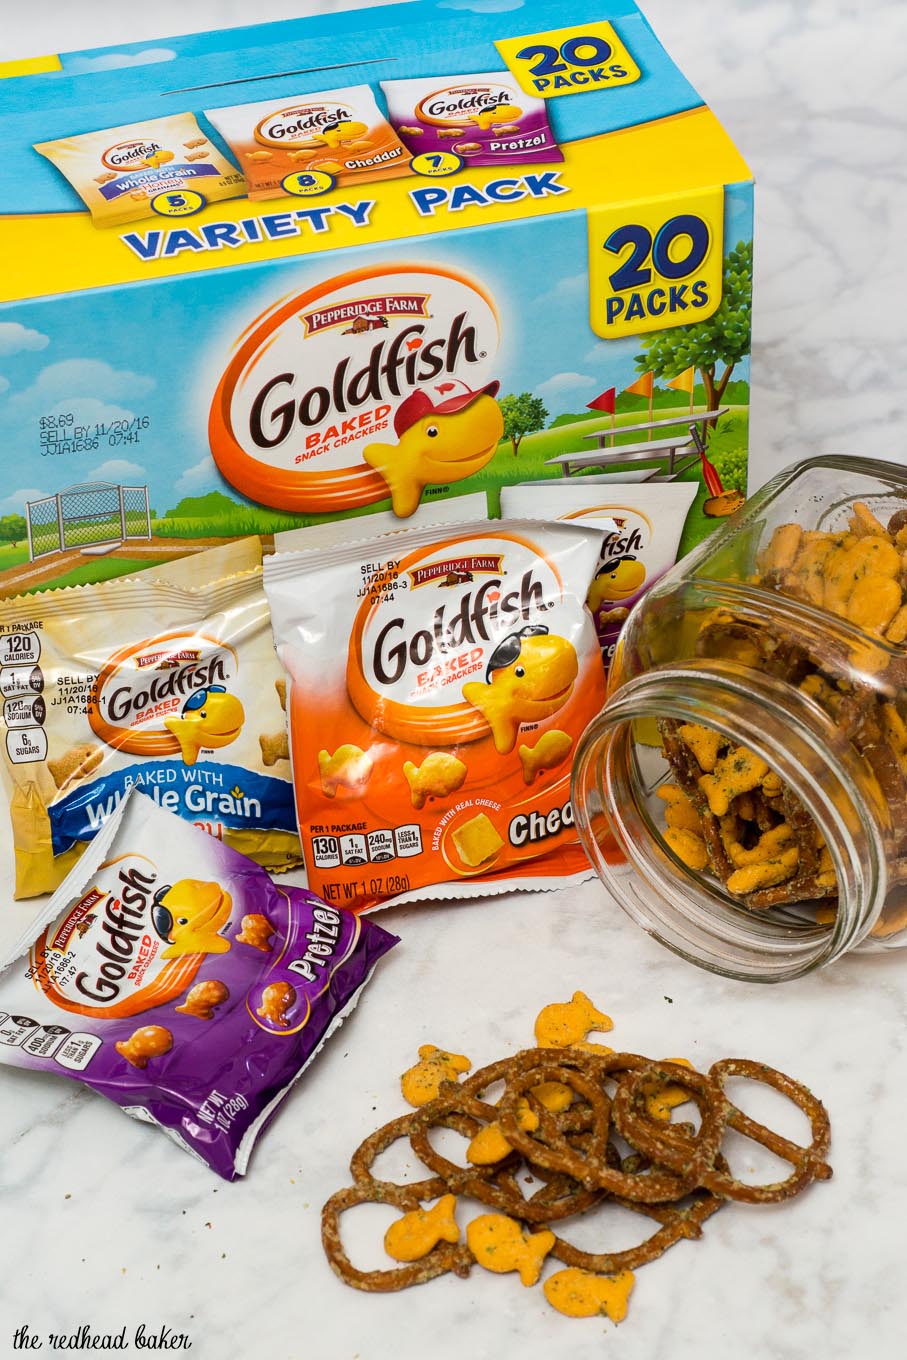 Back-to-school is a busy time. Snack smarter with Ranch Goldfish® Snack Mix, perfect for after-school or on-the-go. #MixMatchMunch #ad